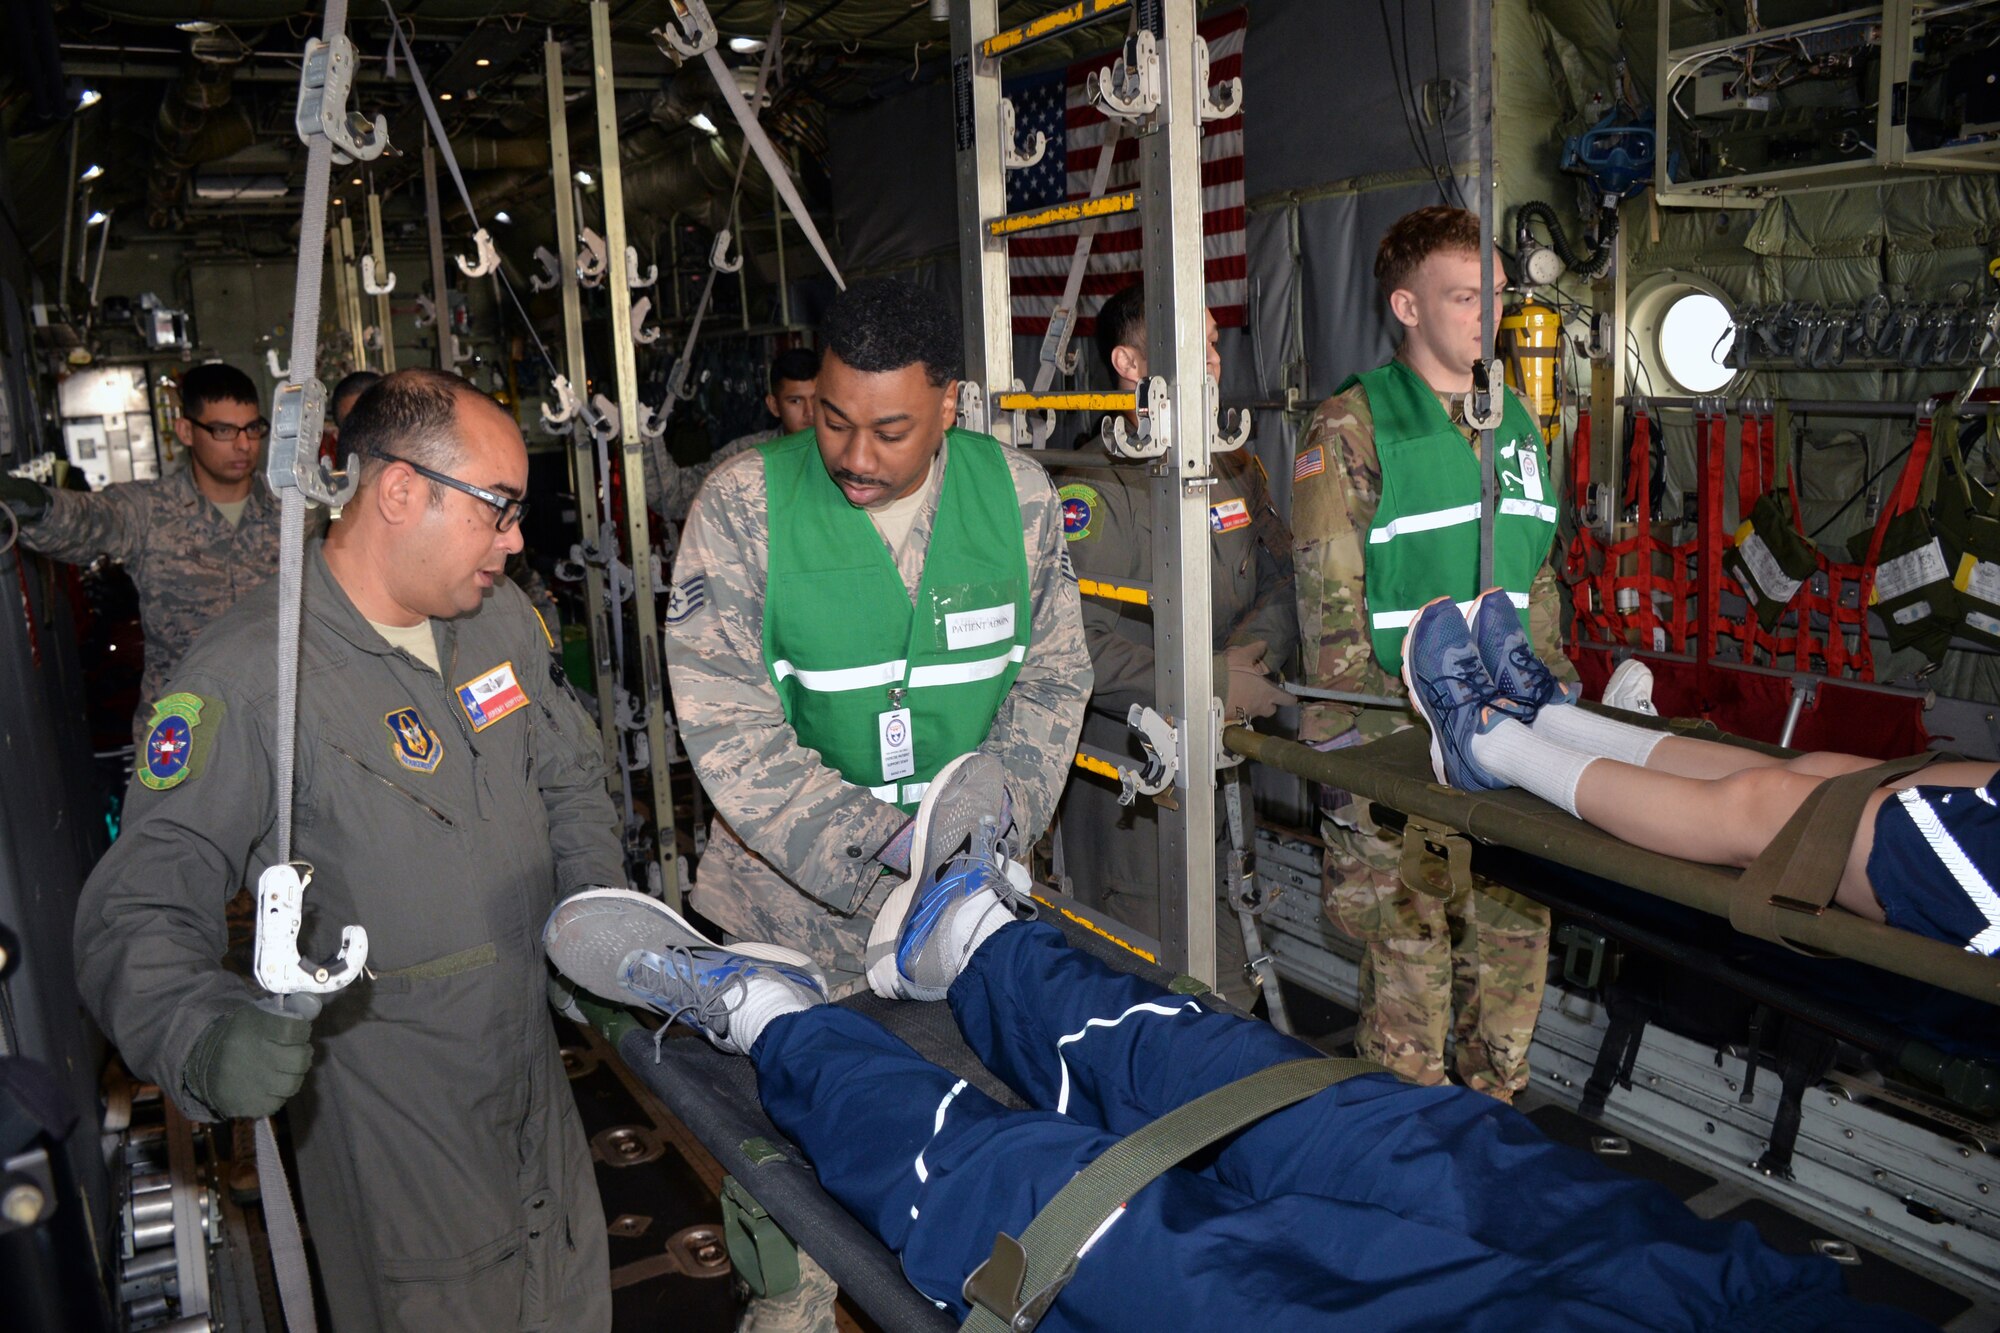 433rd Aeromedical Evacuation Squadron, 59th Medical Wing, and Brooke Army Medical Center personnel prepare to unload simulated litter patients during a National Disaster Medical System exercise at Joint Base San Antonio-Lackland March 20.